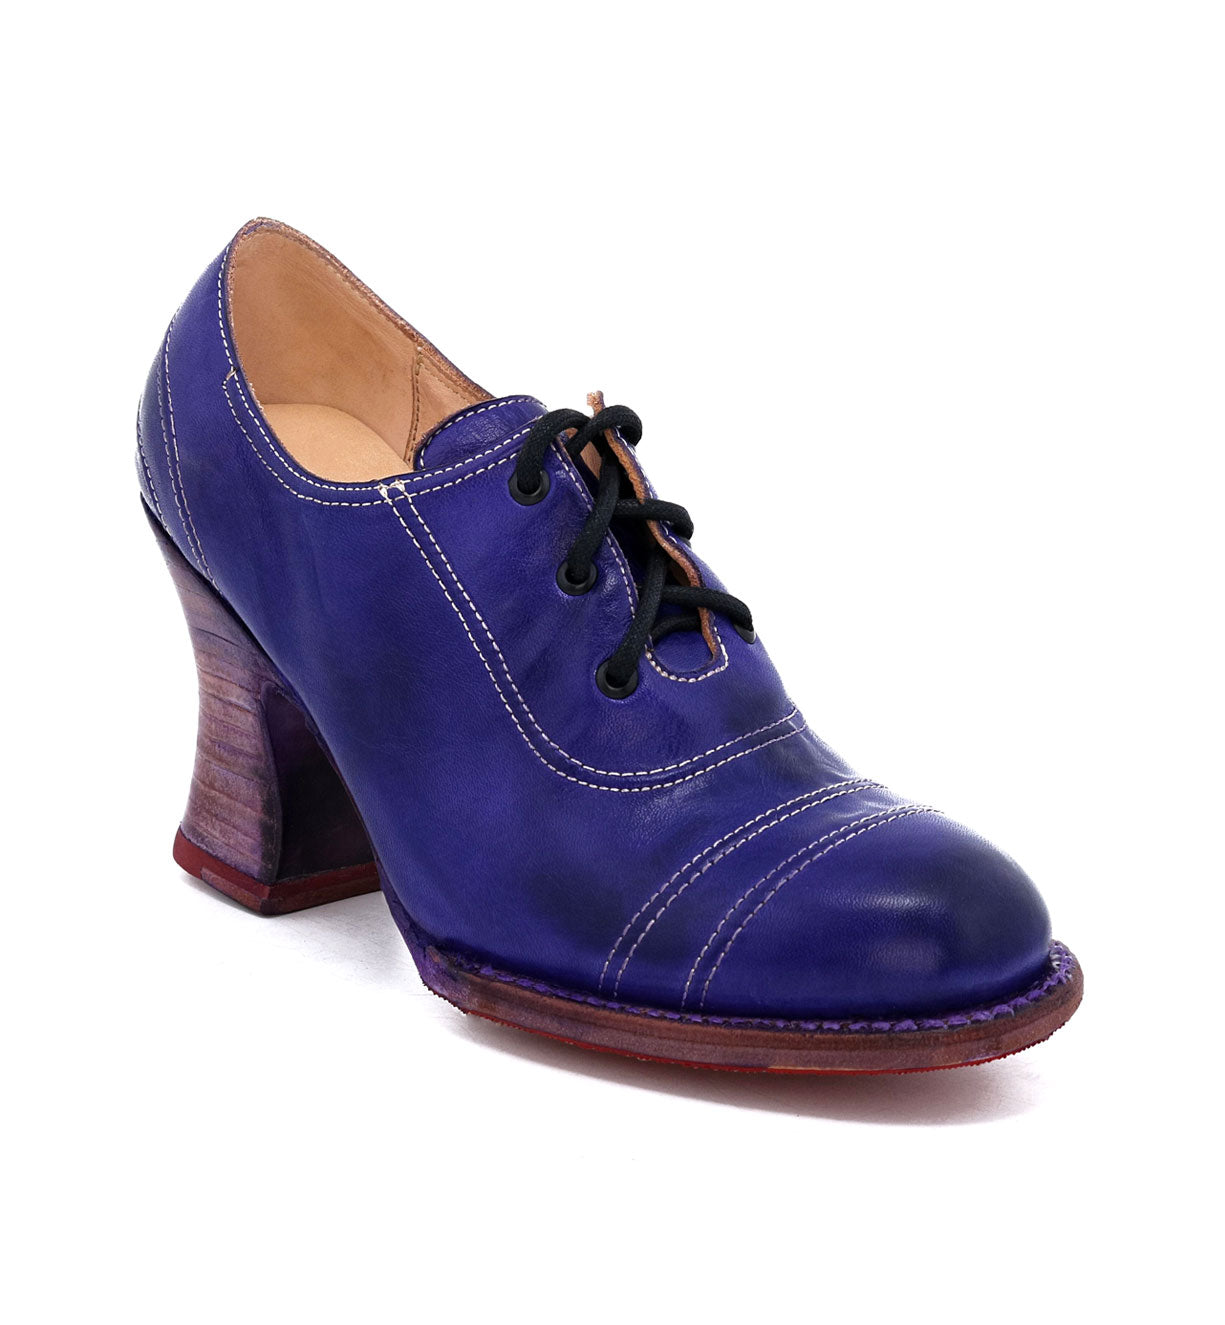 A women's blue Nanny shoe by Oak Tree Farms with a wooden heel, adding an enchanting touch to any outfit.